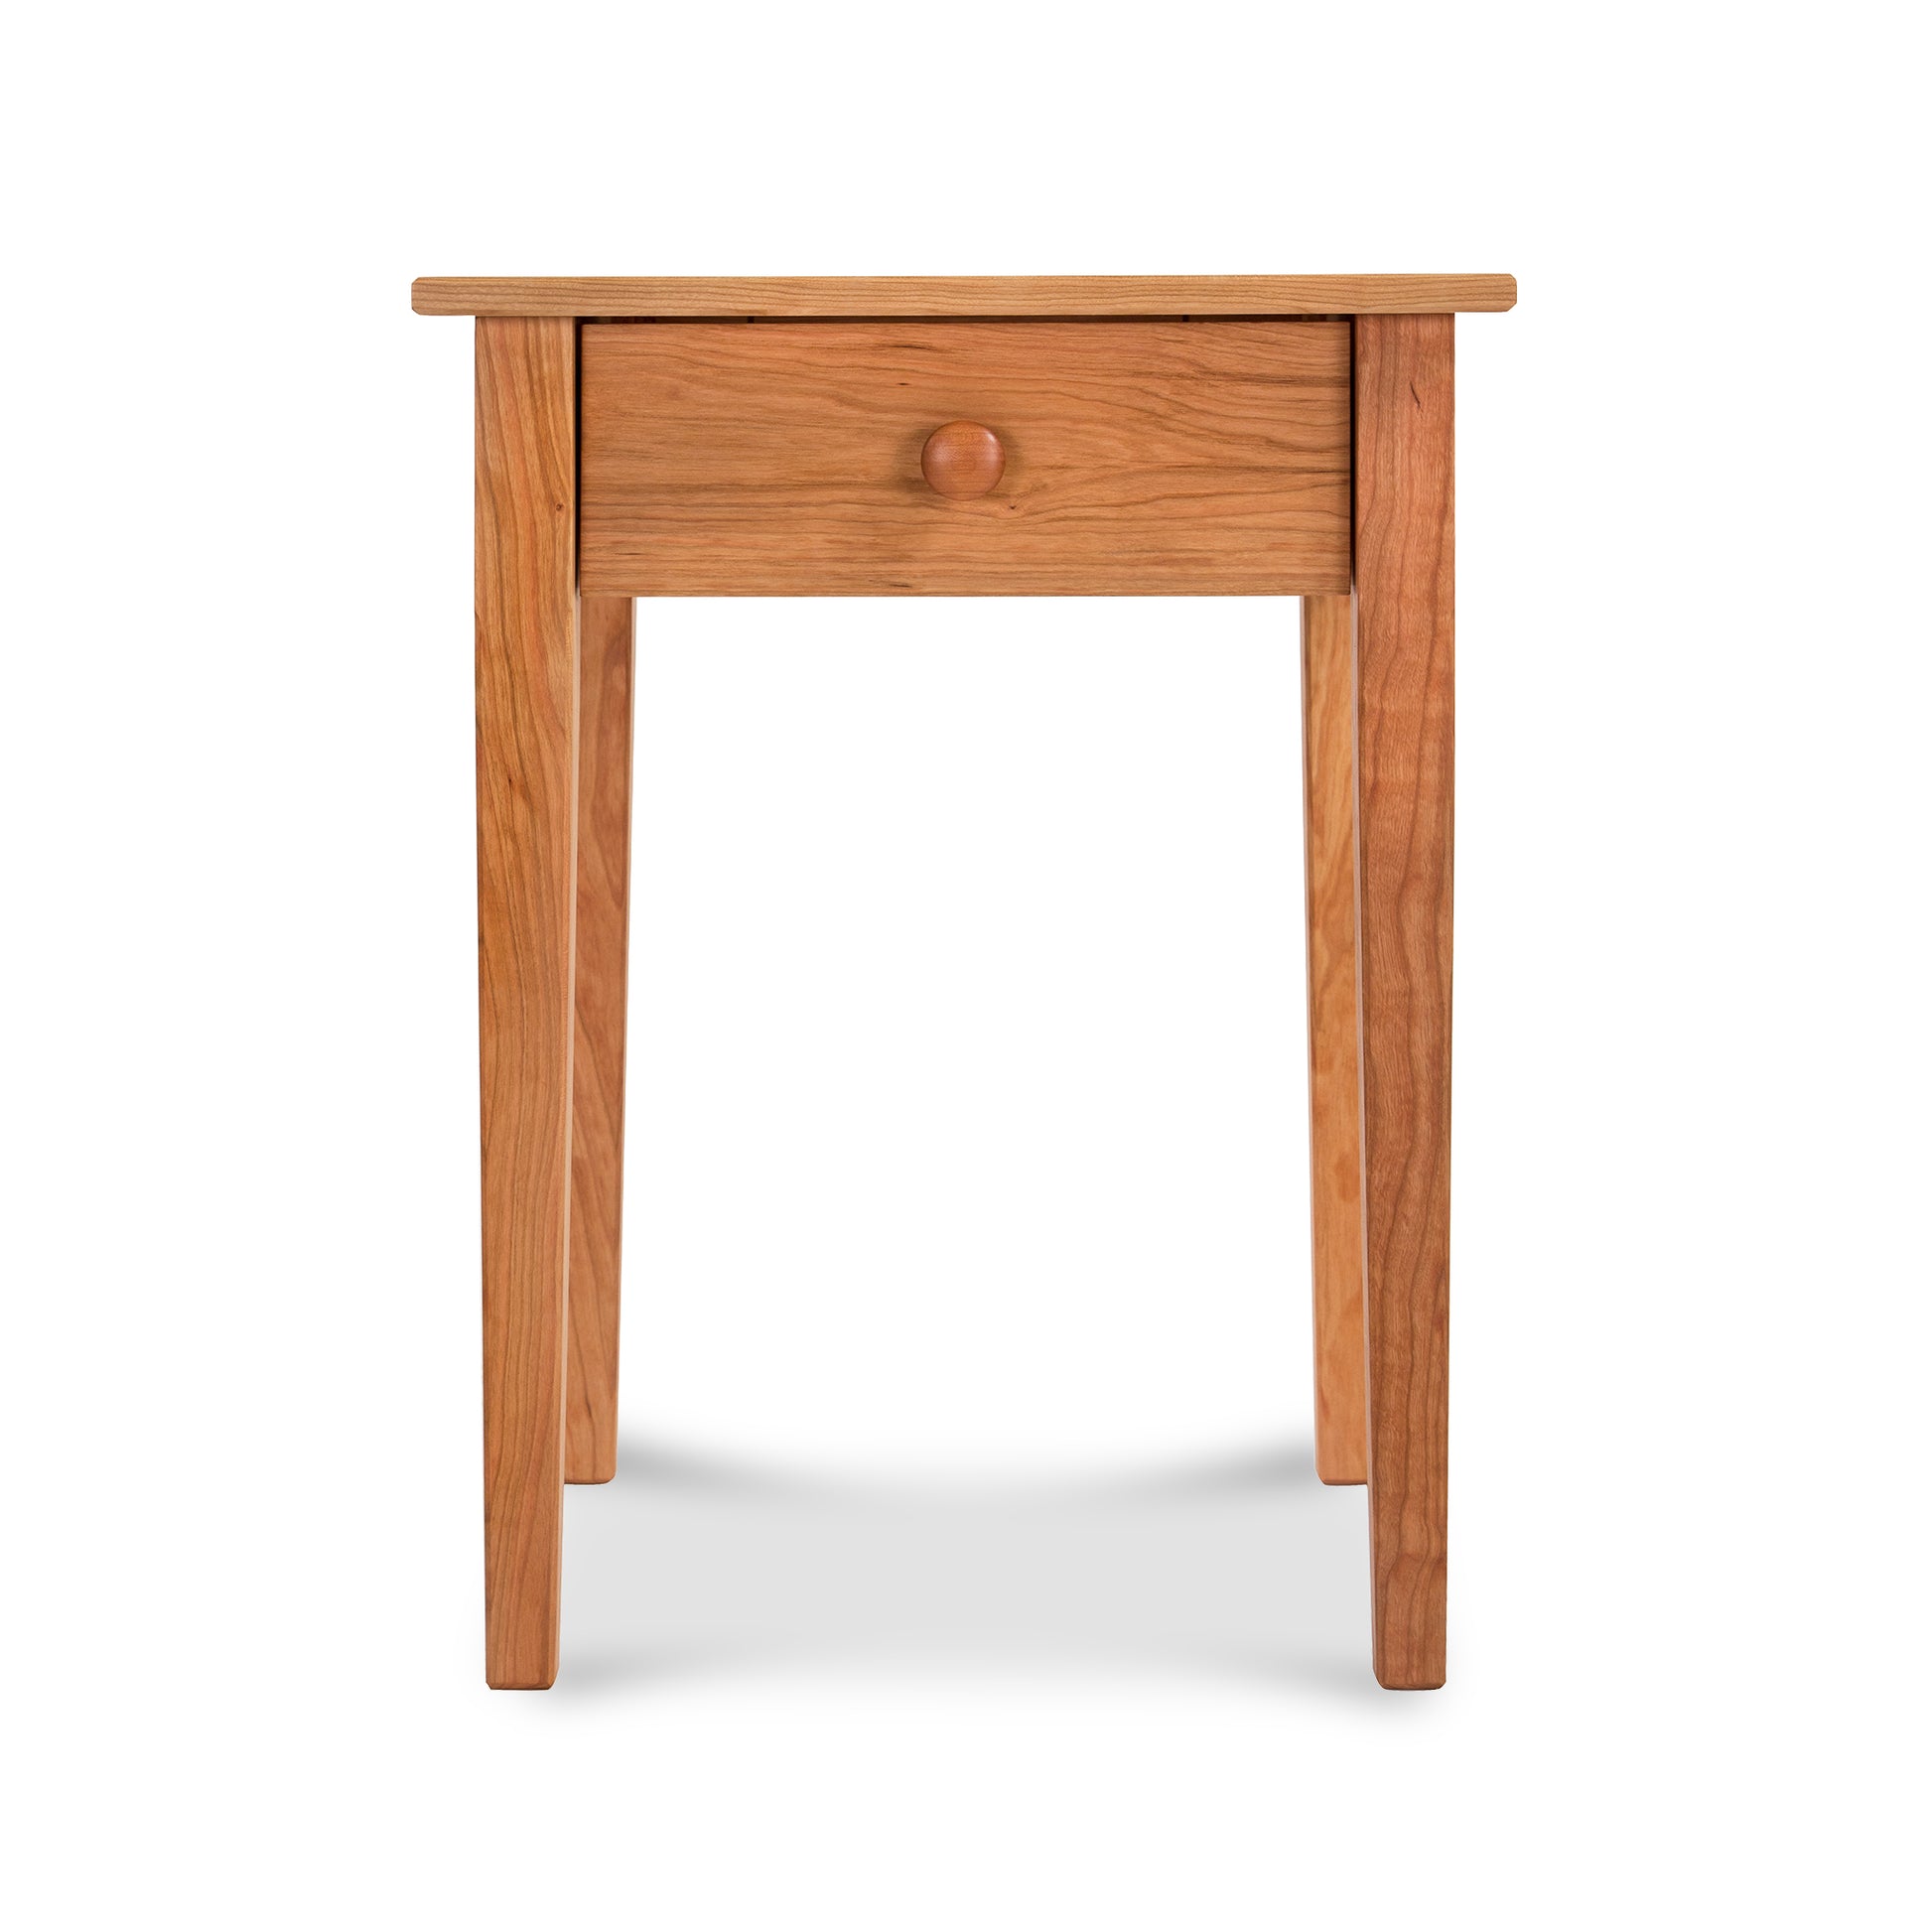 A Vermont Shaker Bedside Table, crafted from sustainably harvested solid woods by Maple Corner Woodworks, with a single drawer and a round knob, standing against a white background. The table features a smooth finish and visible wood grain.